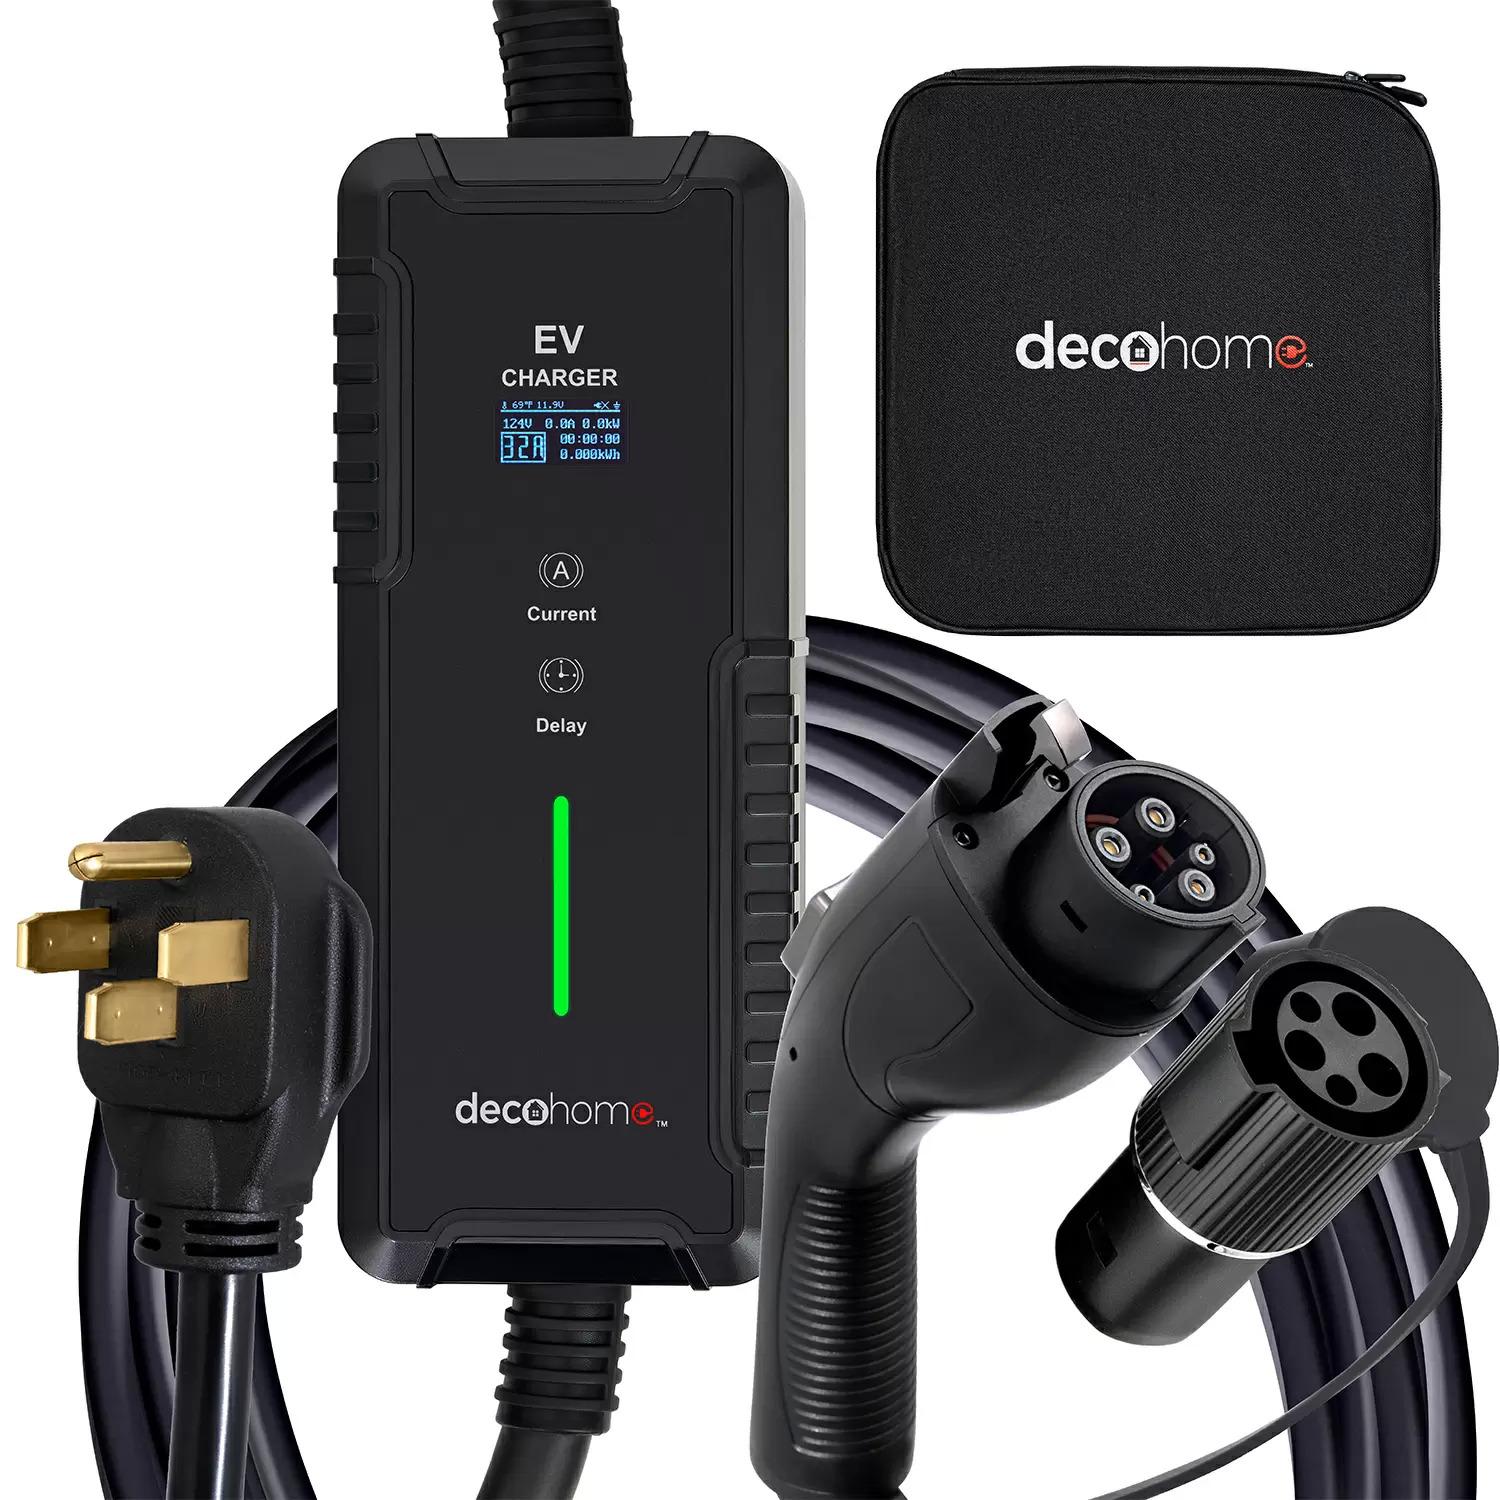 Deco Home Level 1-2 240V 32A Portable EV Charger for $119 Shipped